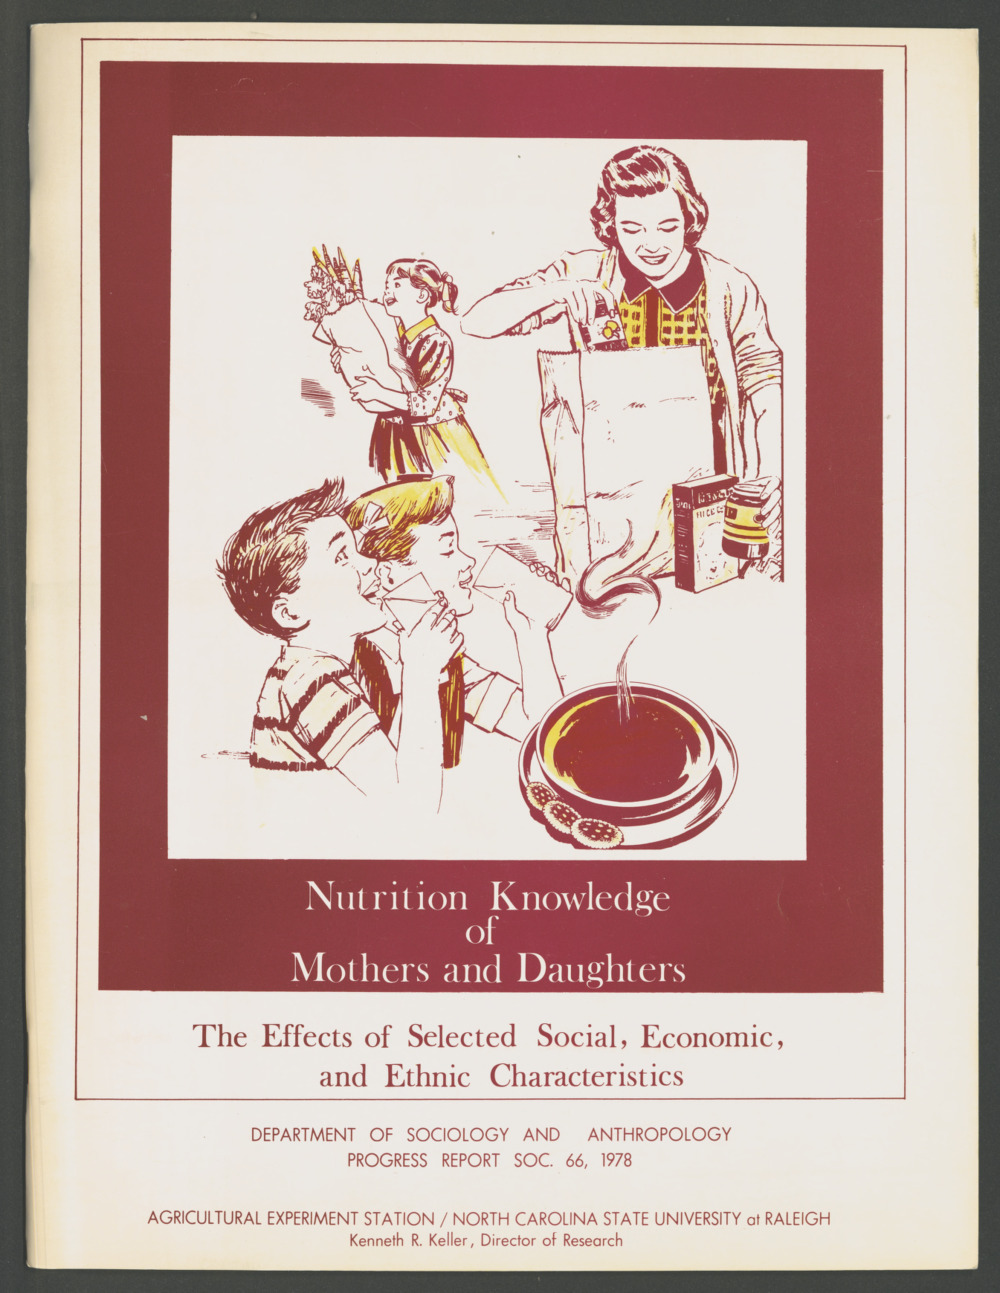 Progress Report SOC 66 (Nutrition Knowledge of Mothers and Daughters), 1978, is one of may newly digitized resources available.